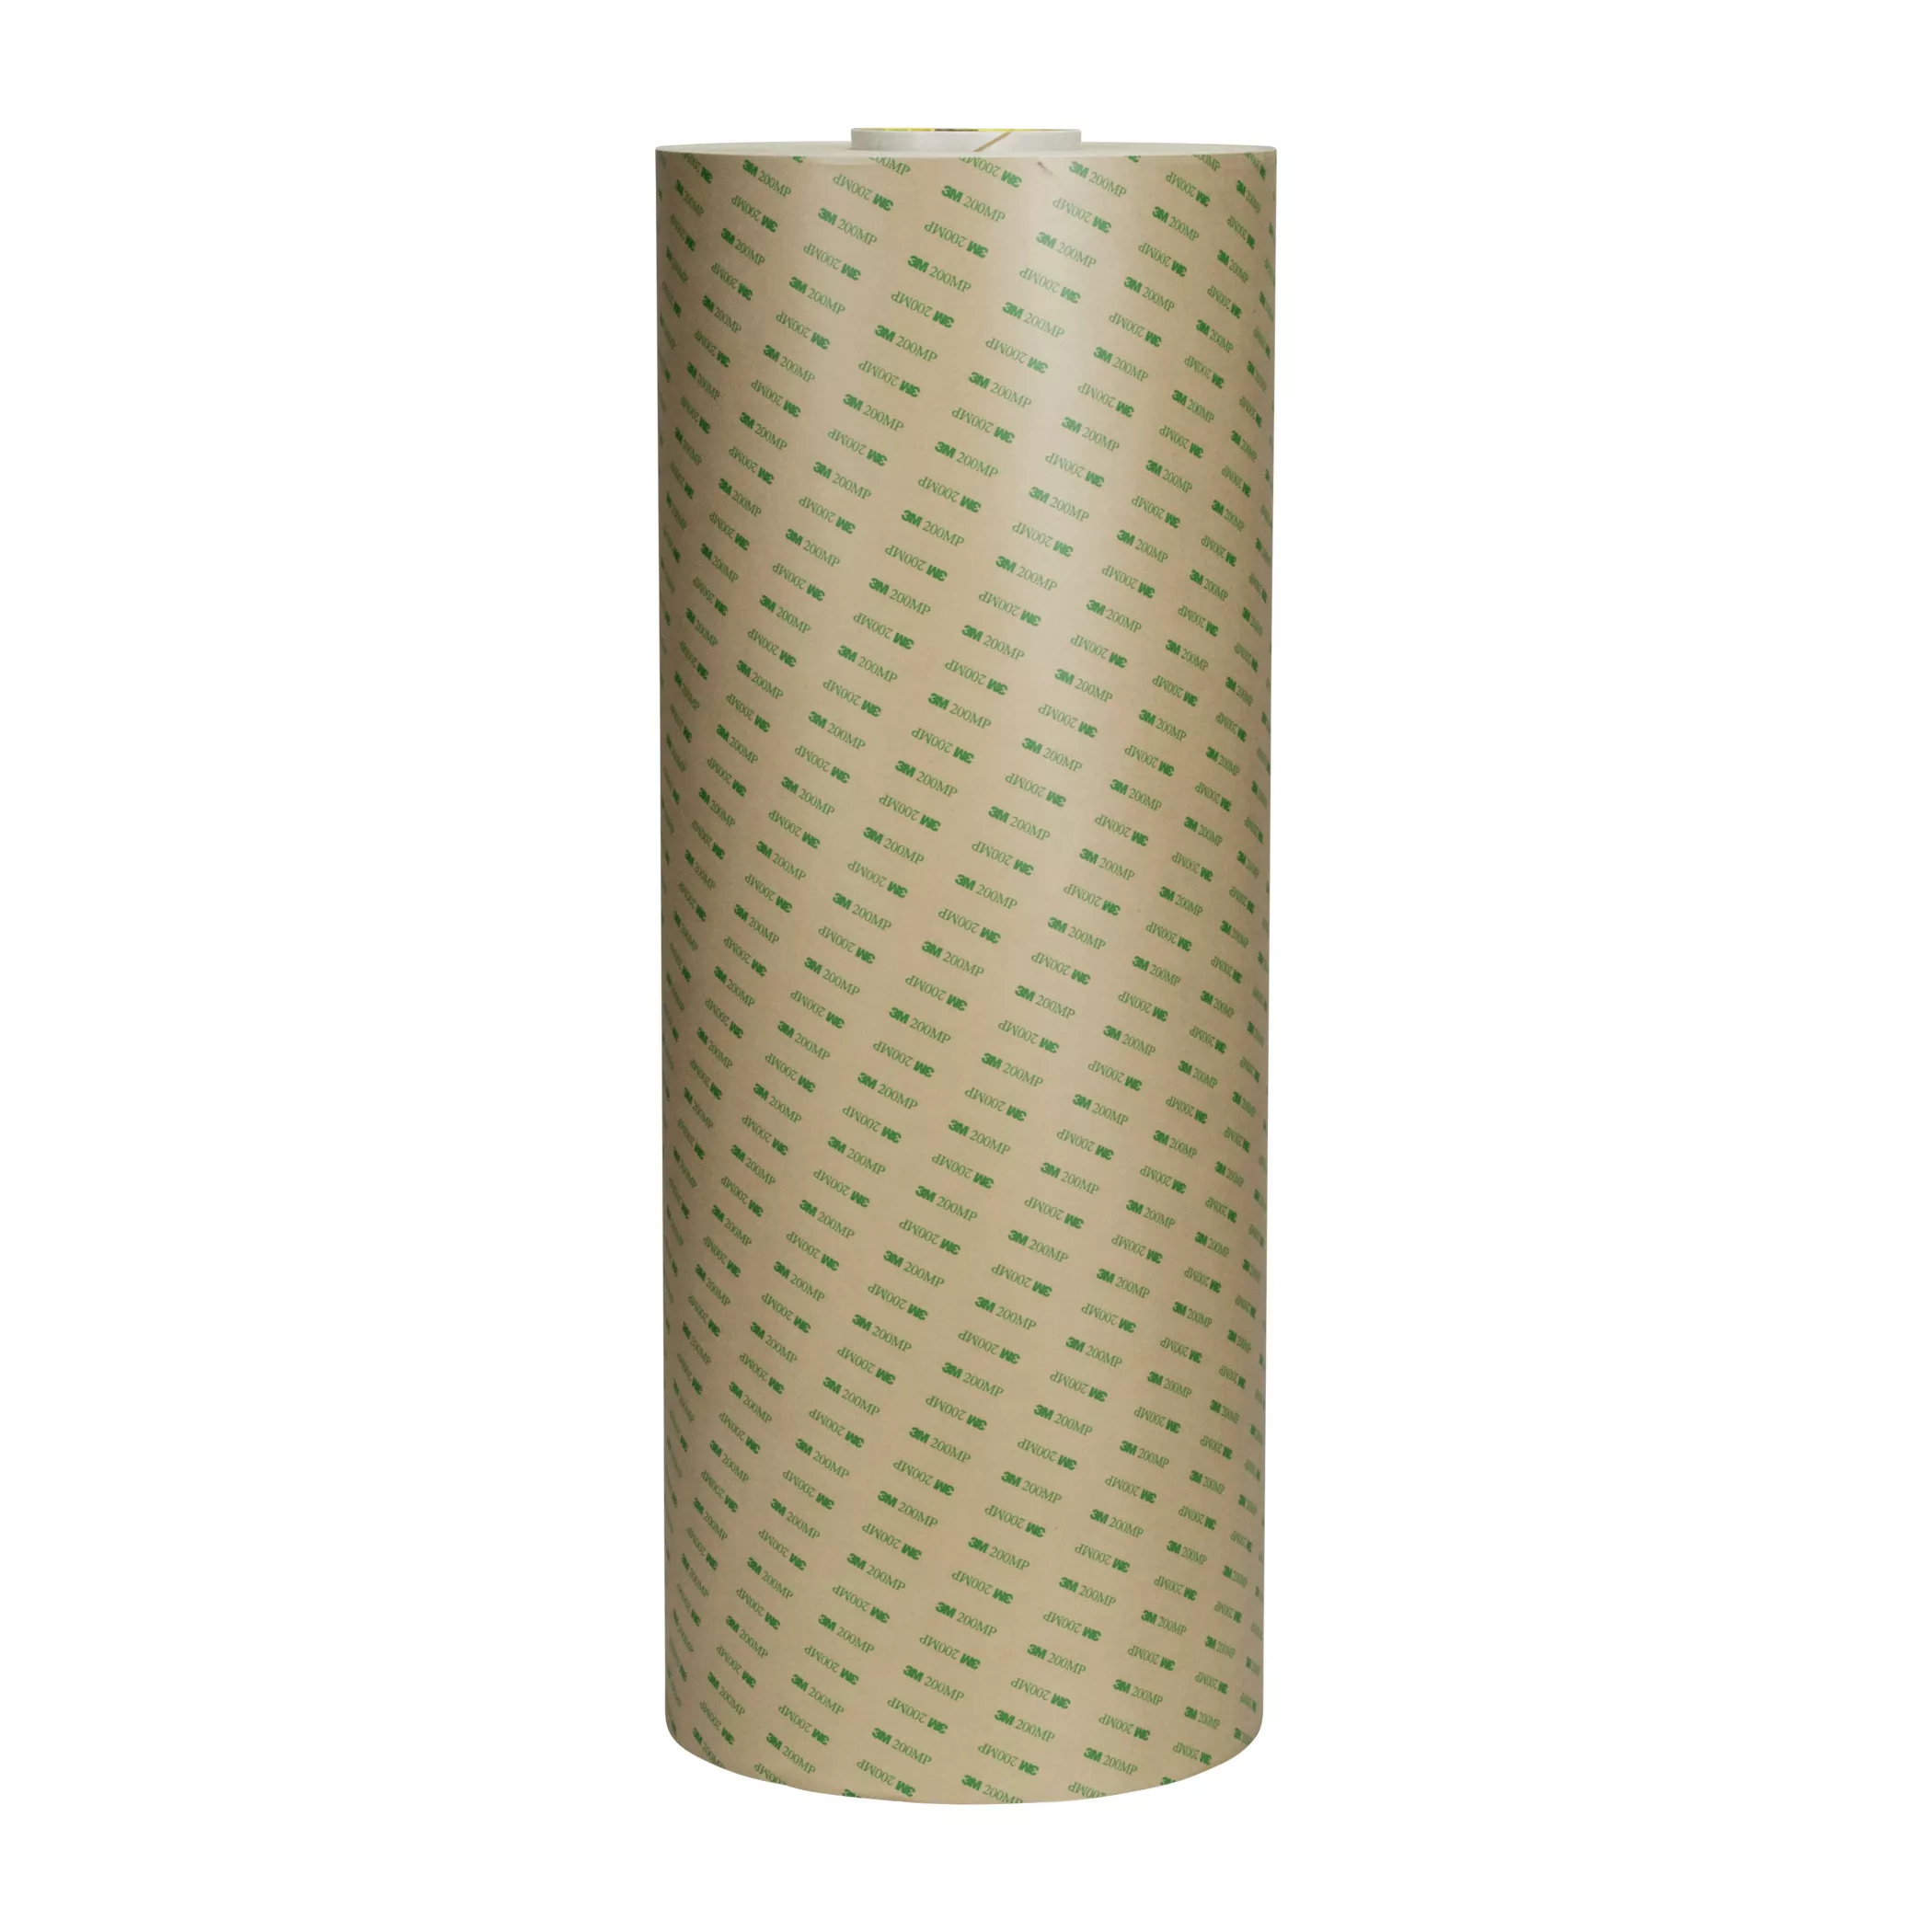 3M™ Adhesive Transfer Tape 9667MP, Clear, 27 in x 60 yd, 2 mil, 1 roll
per case